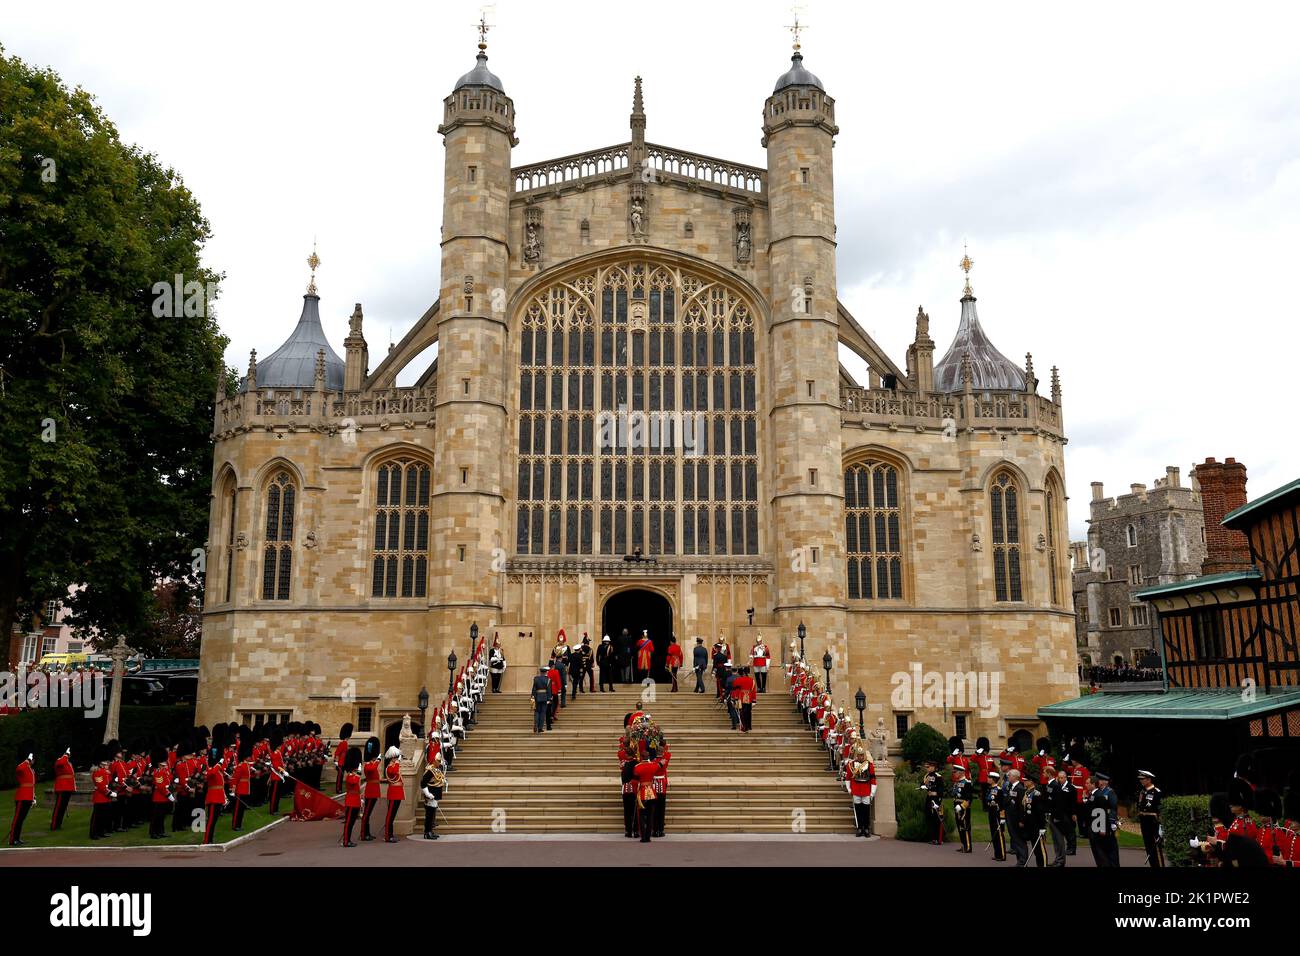 The bearer party from the Queen's Company, 1st Battalion Grenadier Guards carry the coffin of Queen Elizabeth II in to St George's Chapel at Windsor Castle for the Committal Service following the state funeral at Westminster Abbey. Picture date: Monday September 19, 2022. Stock Photo